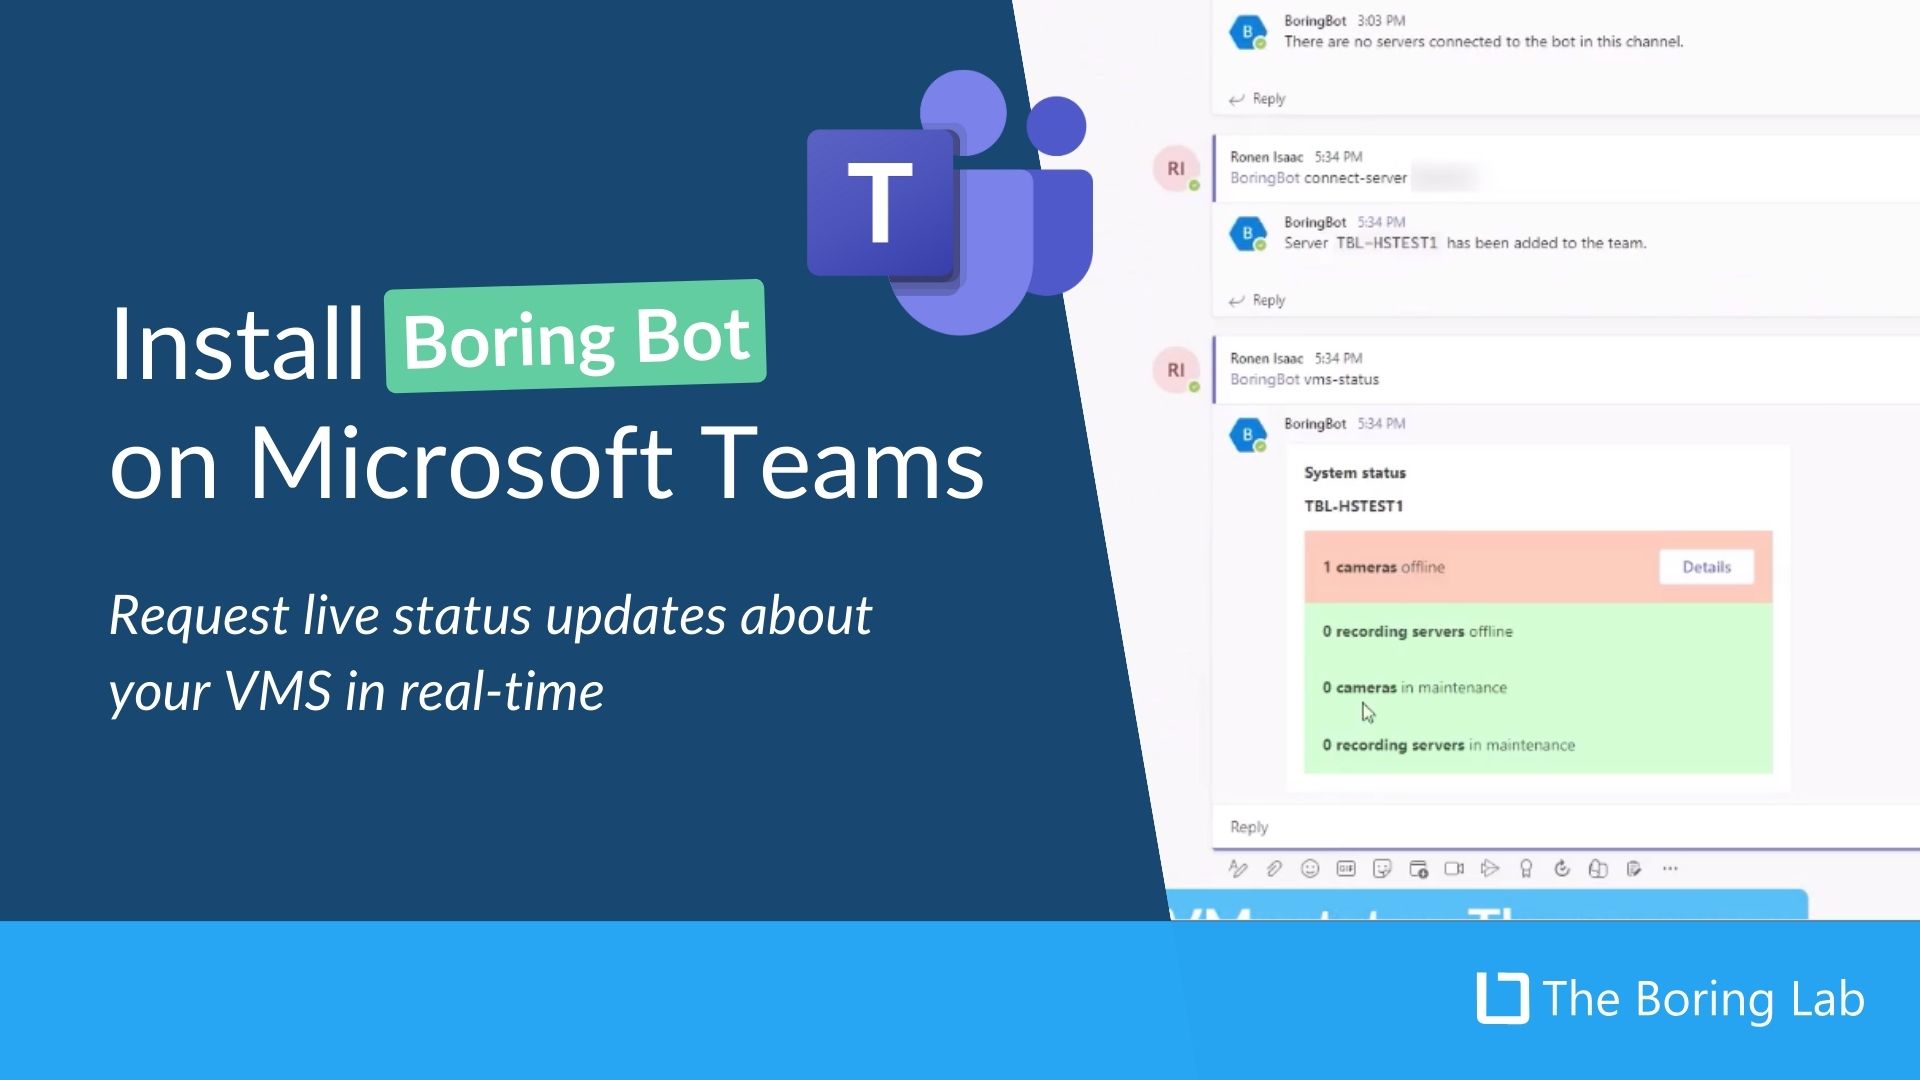 Getting Started with BoringBot for Microsoft Teams